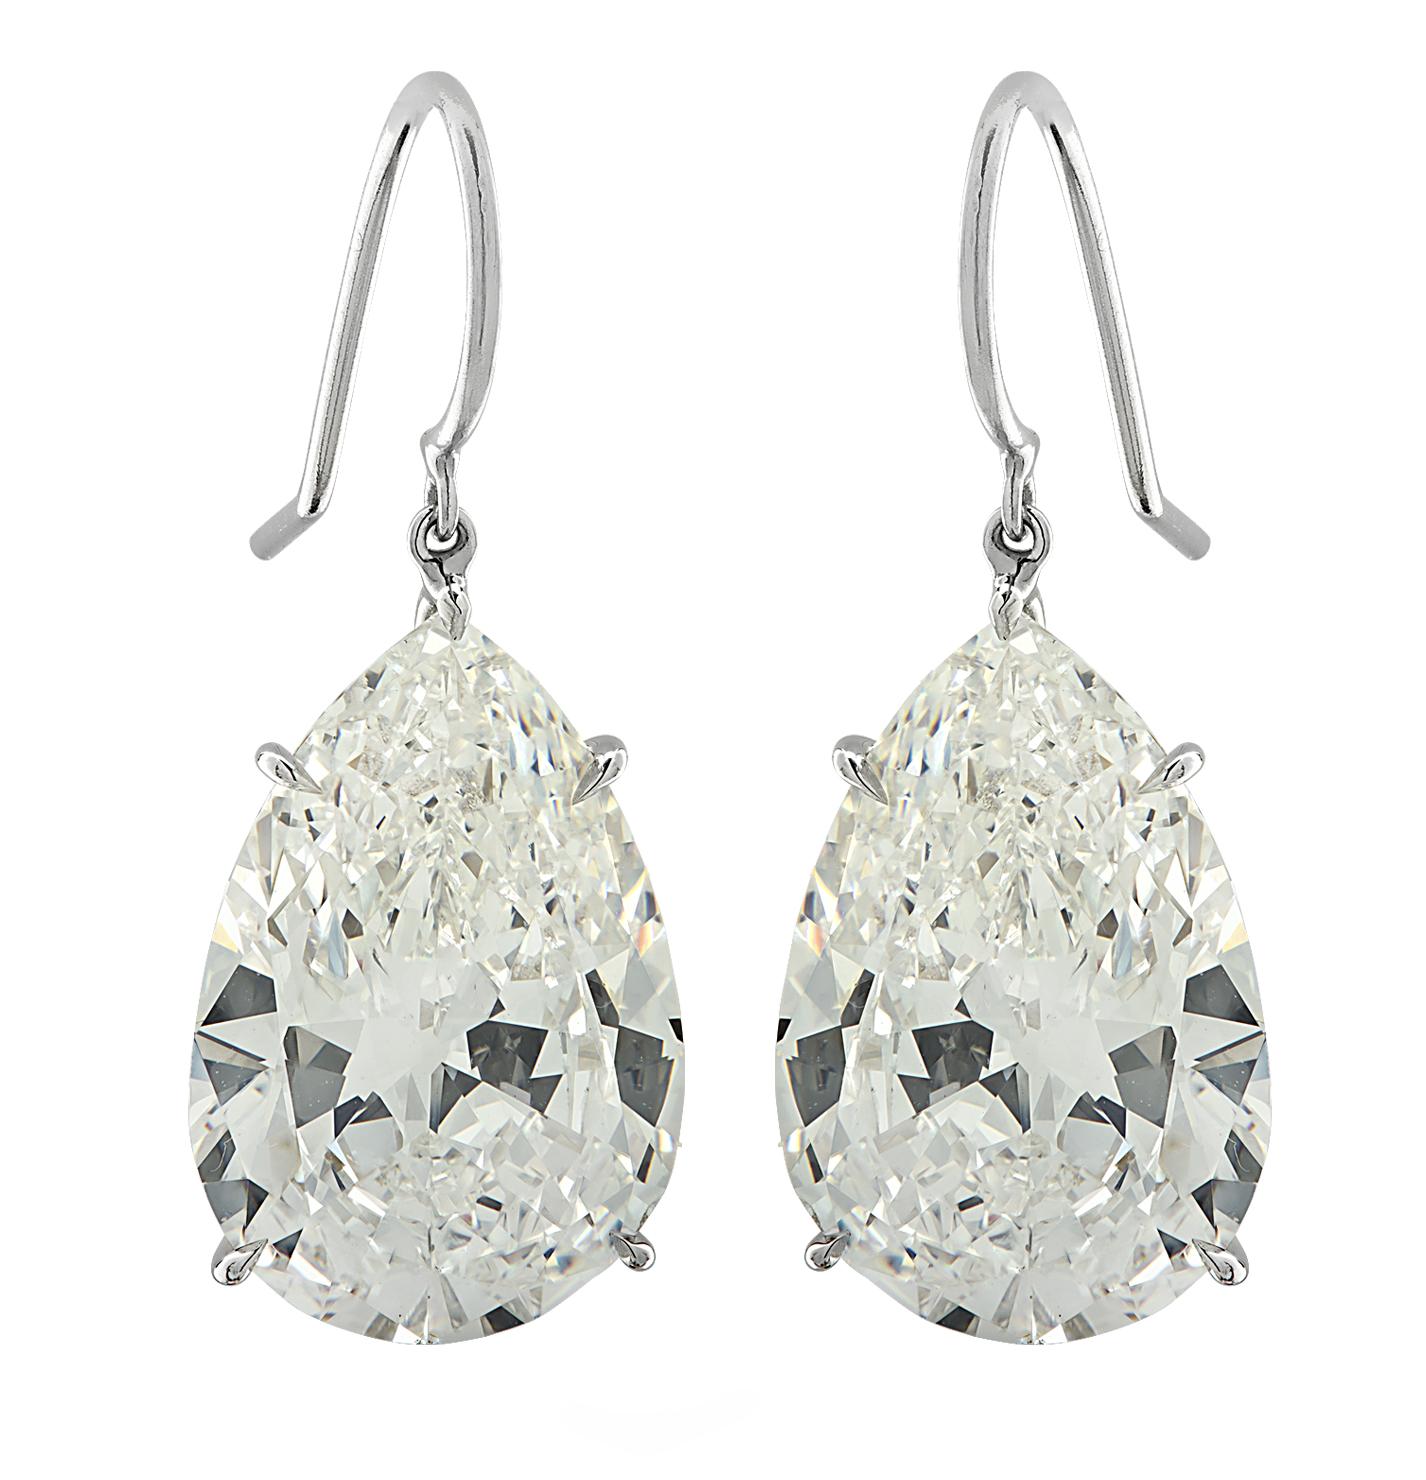 Exquisite Vivid Diamonds Dangle Earrings crafted in Platinum showcasing two sensational GIA graded pear shape diamonds weighing 20.48 carats total, I-J color, VS2-SI1 clarity. The diamonds were carefully selected, perfectly matched and set to dance